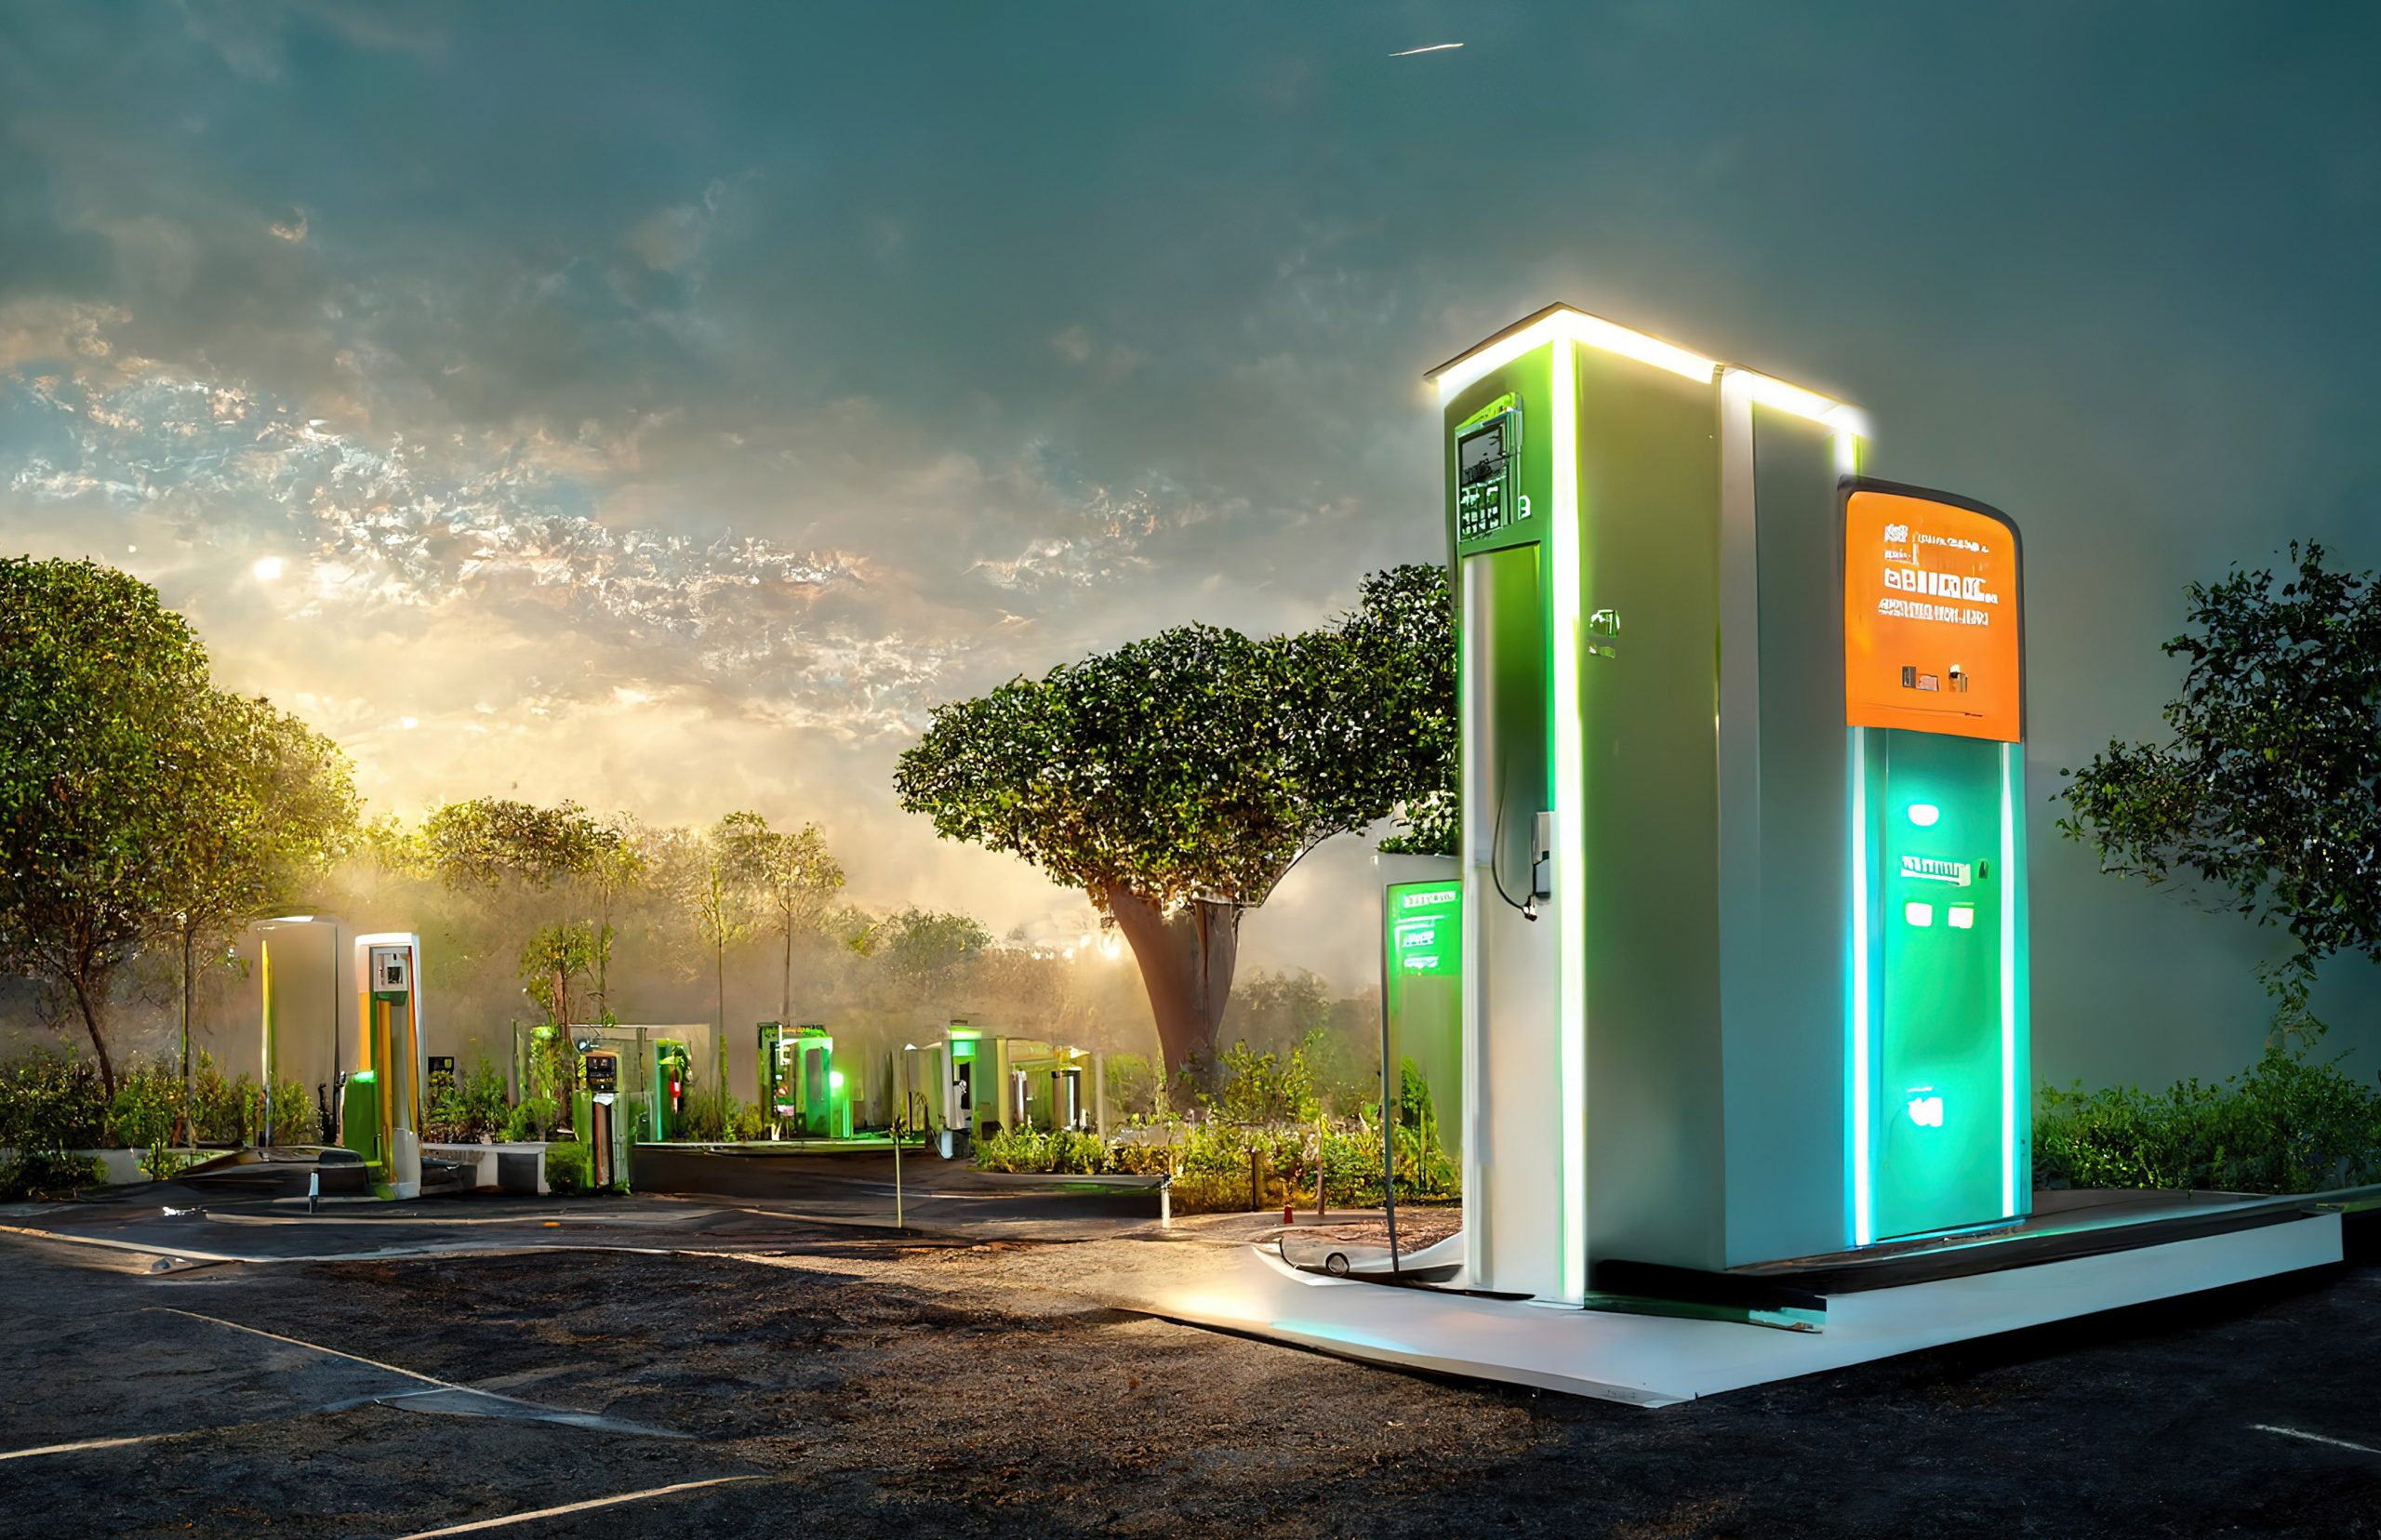 What Are the Benefits of Installing EV Charging Stations?